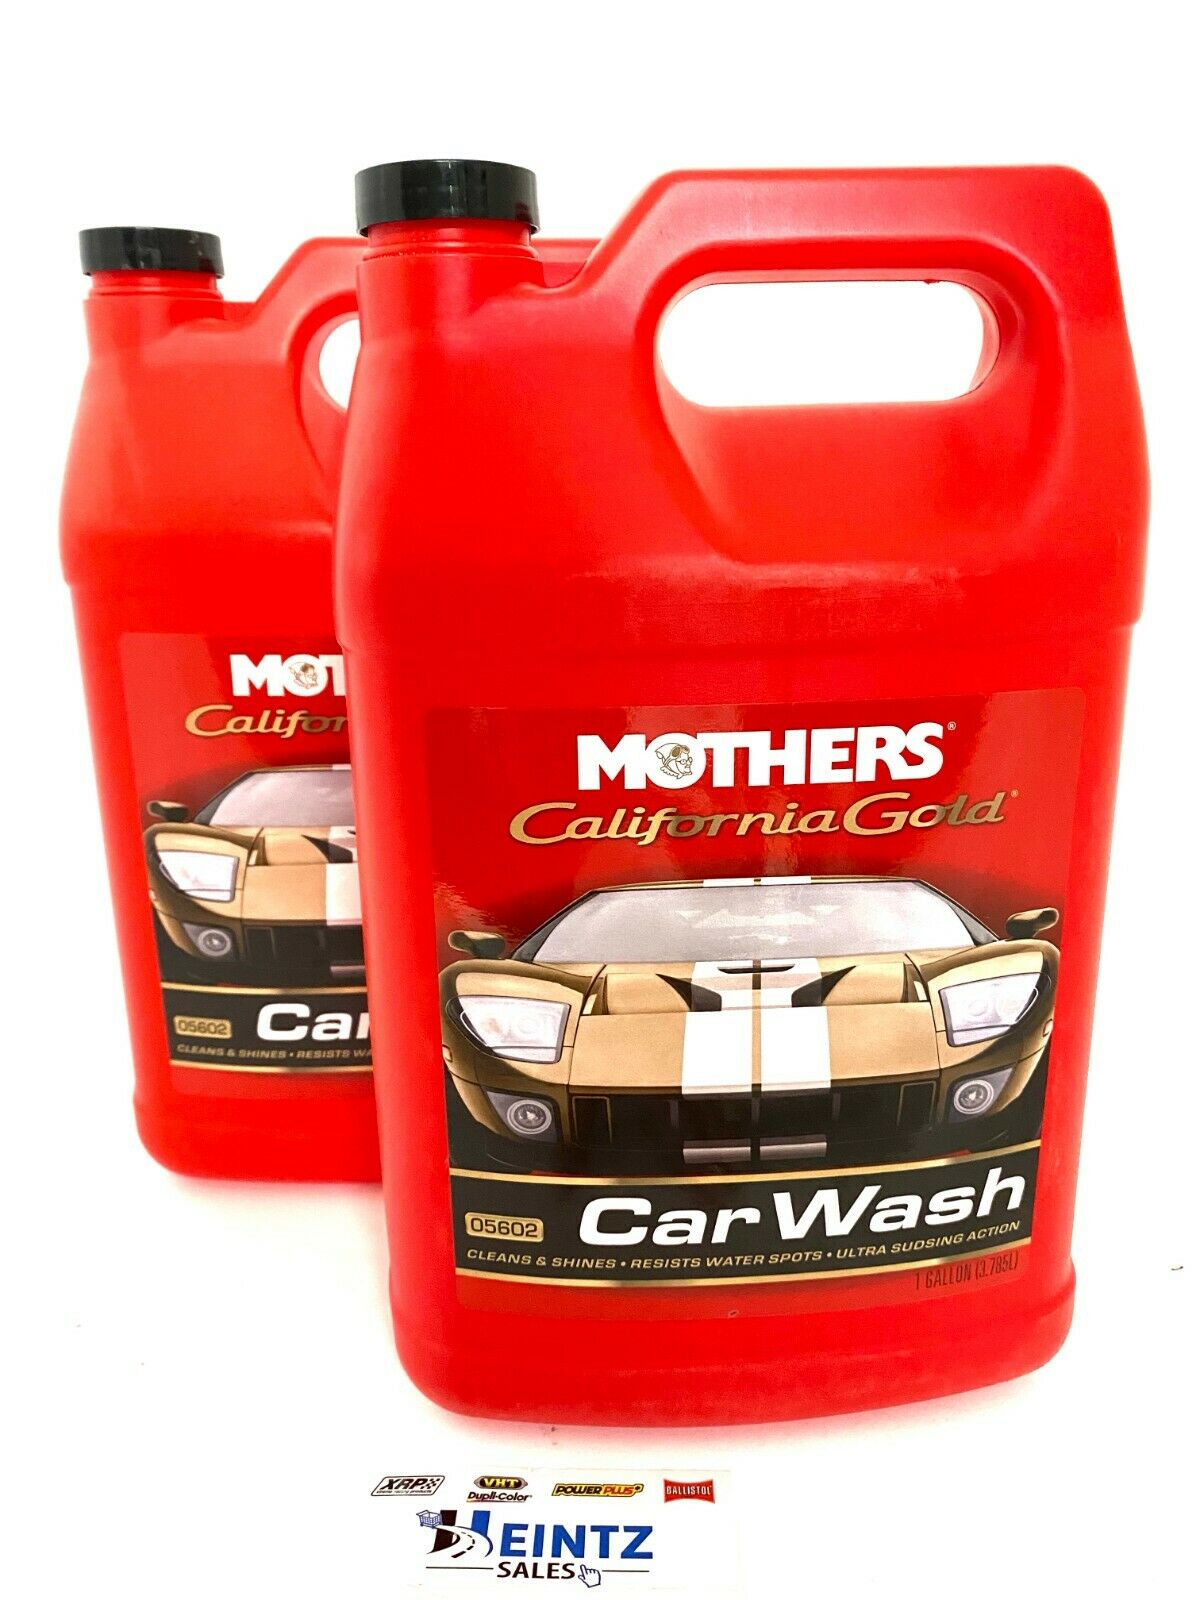 MOTHERS 05602 California Gold Car Wash 2 PACK - Resists water spots - 1 GALLON